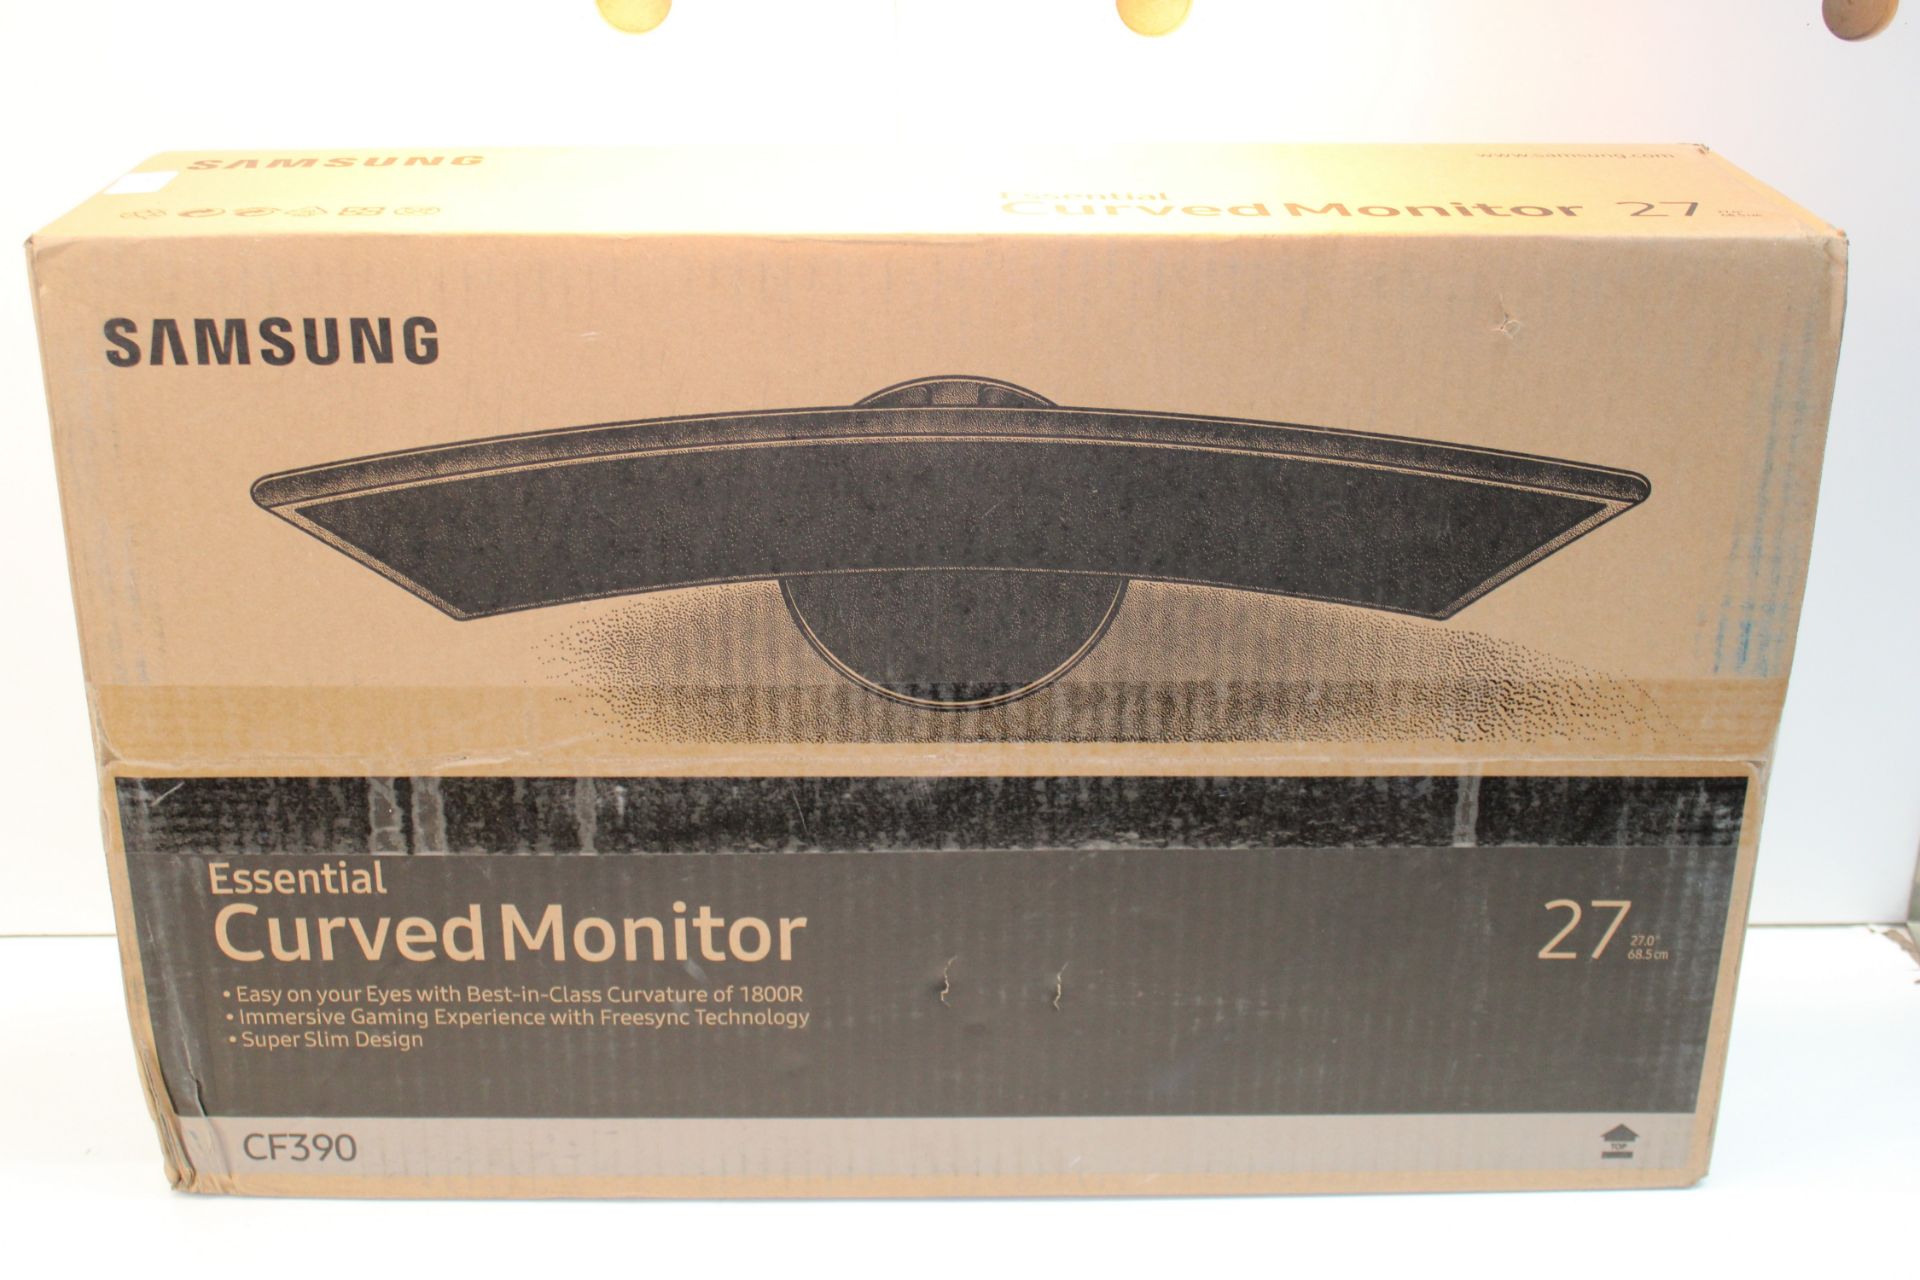 BOXED SAMSUNG ESSENTIAL CURVED MONITOR 27" RRP £169.00 (UNTESTED UNCHECKED)